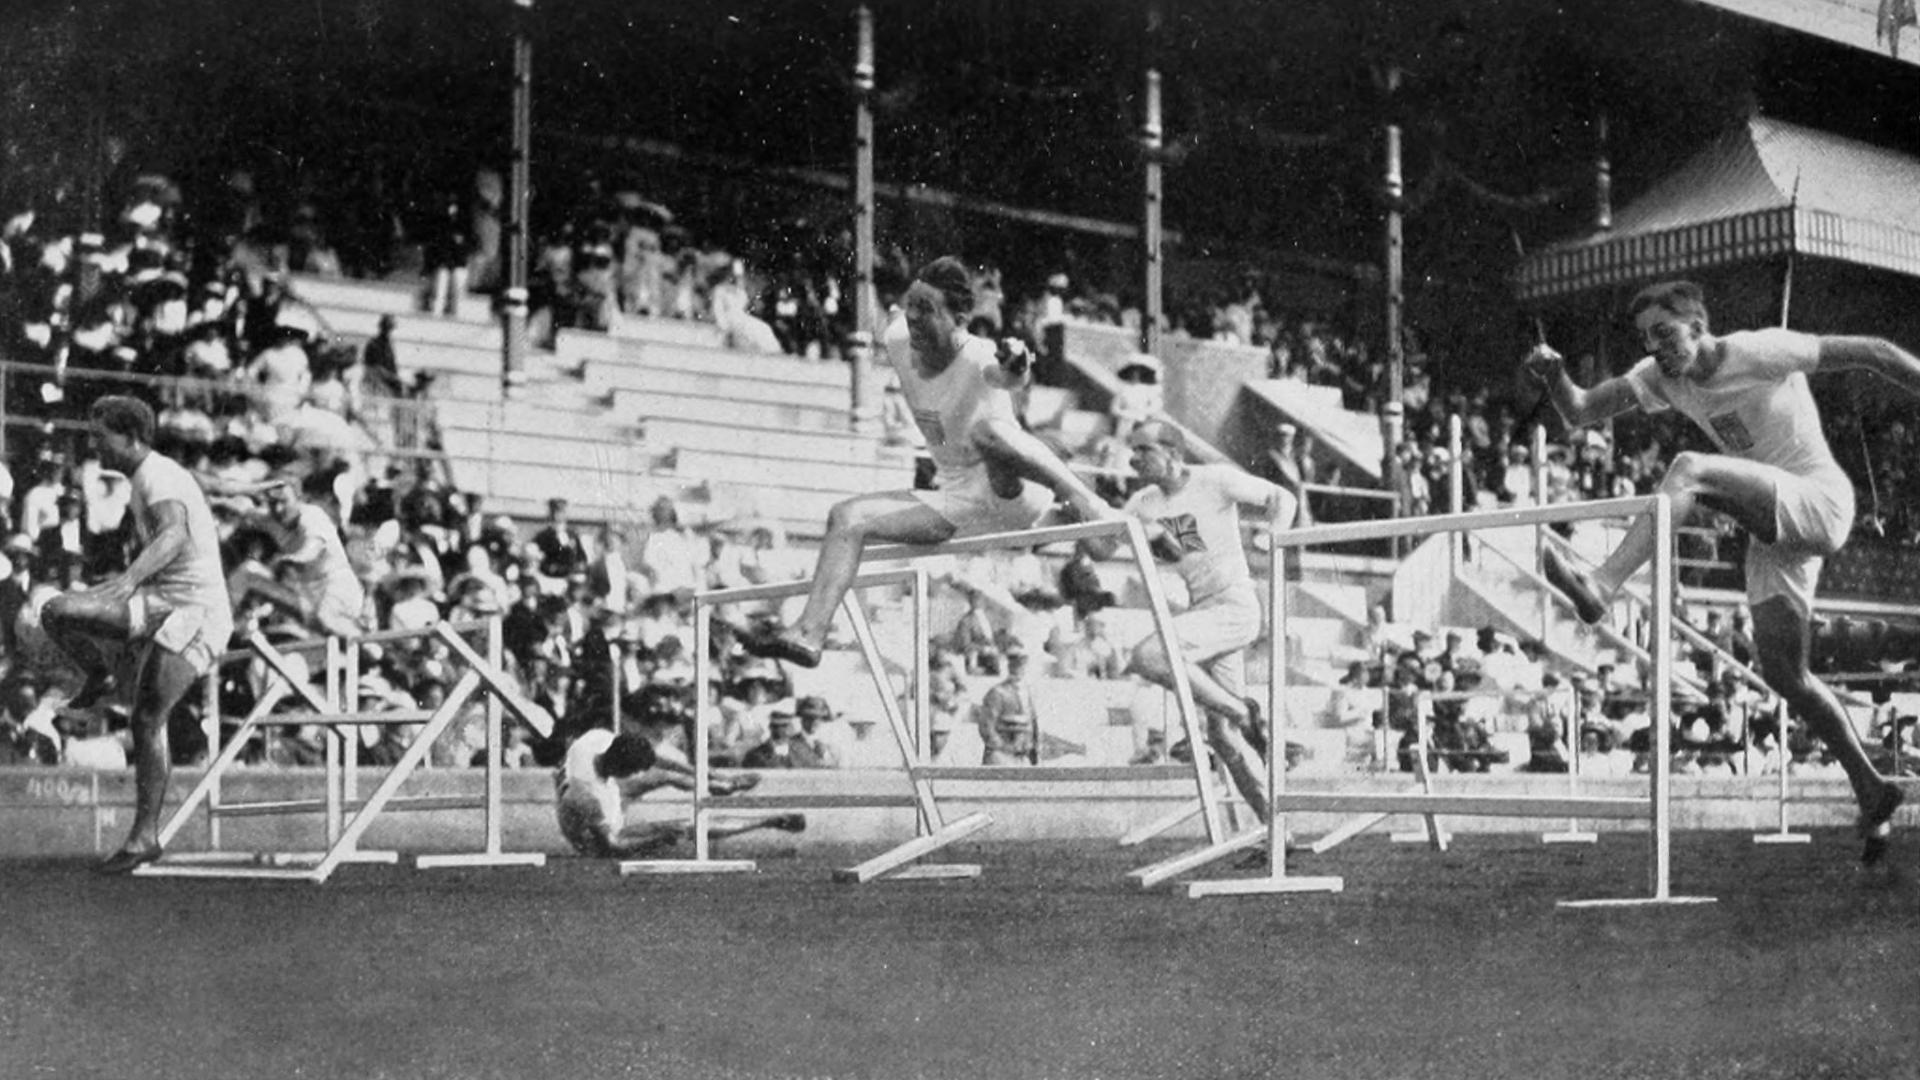 1912 Athletics men's 110 metre hurdles final, with several of the men falling over.